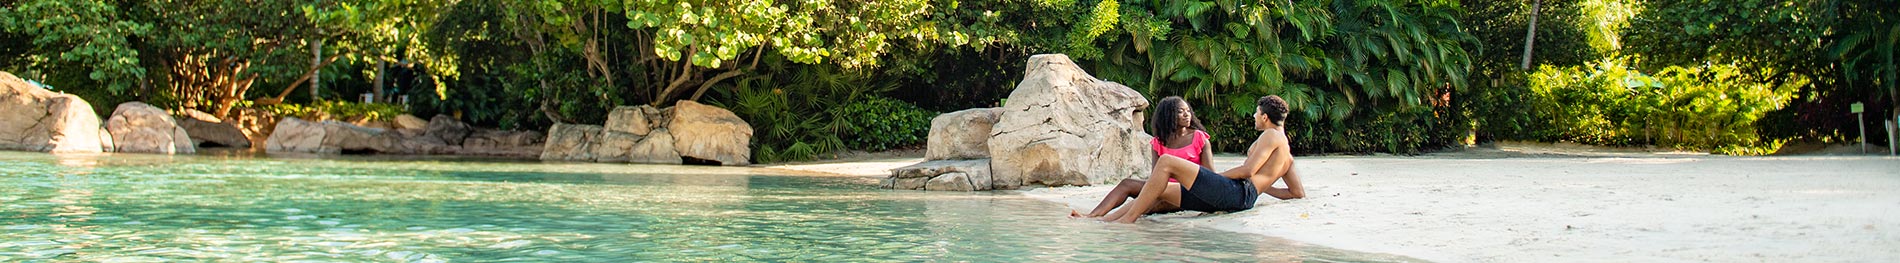 Relaxing on the pristine beaches of Discovery Cove in Orlando Florida